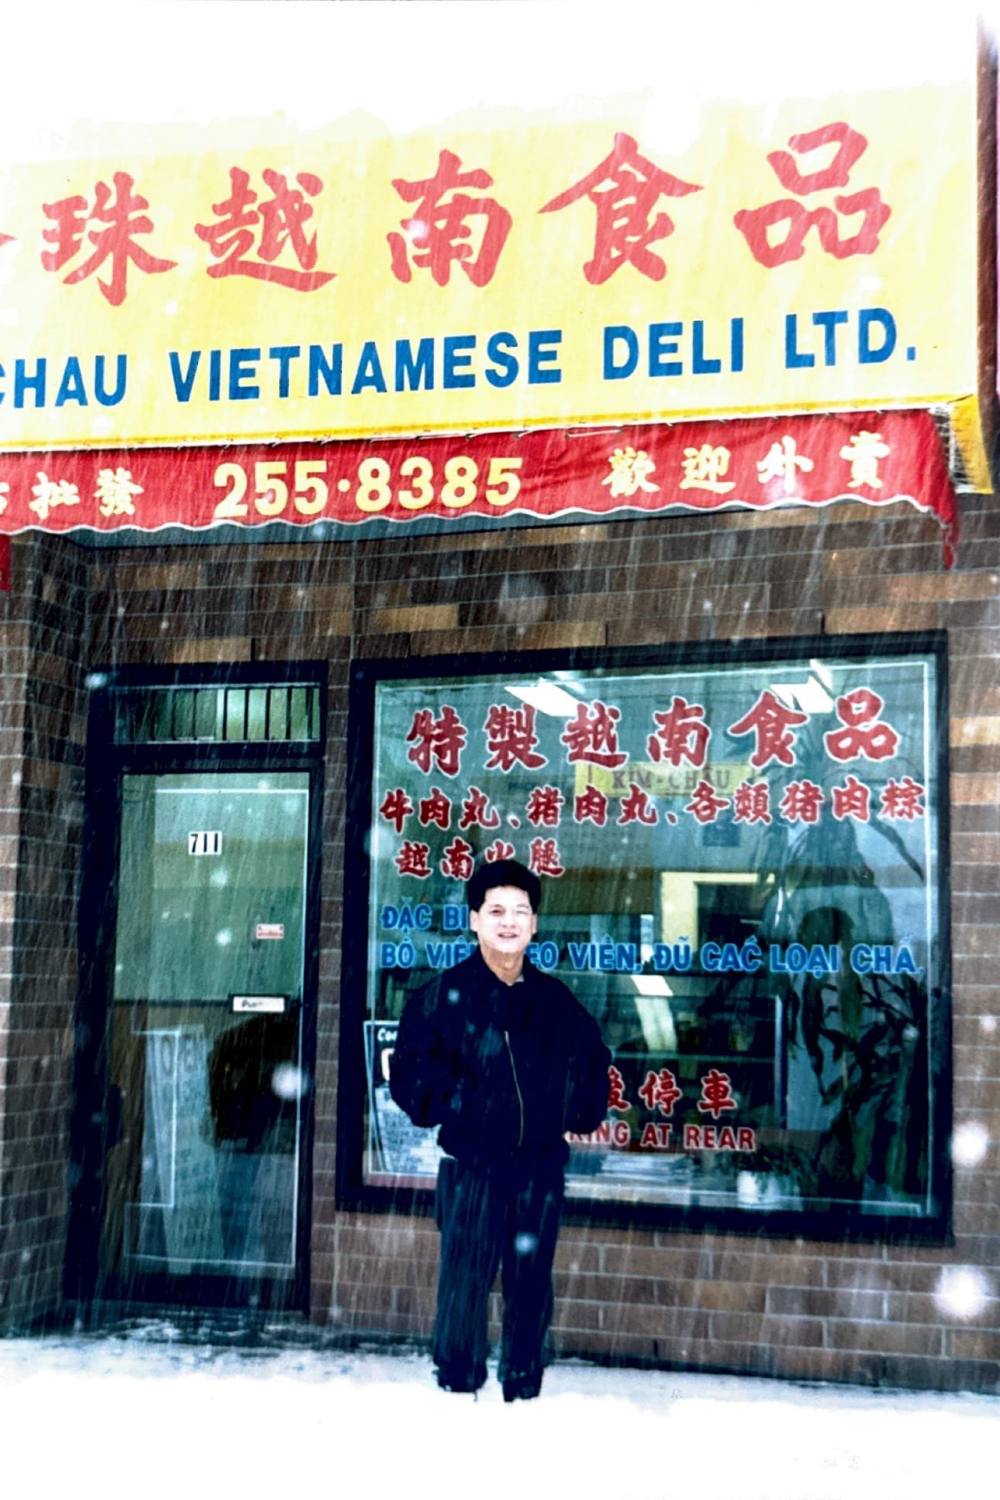 A photo from the late-1980s showing a man smiling in front of a Vietnamese deli. It is a snowy day.